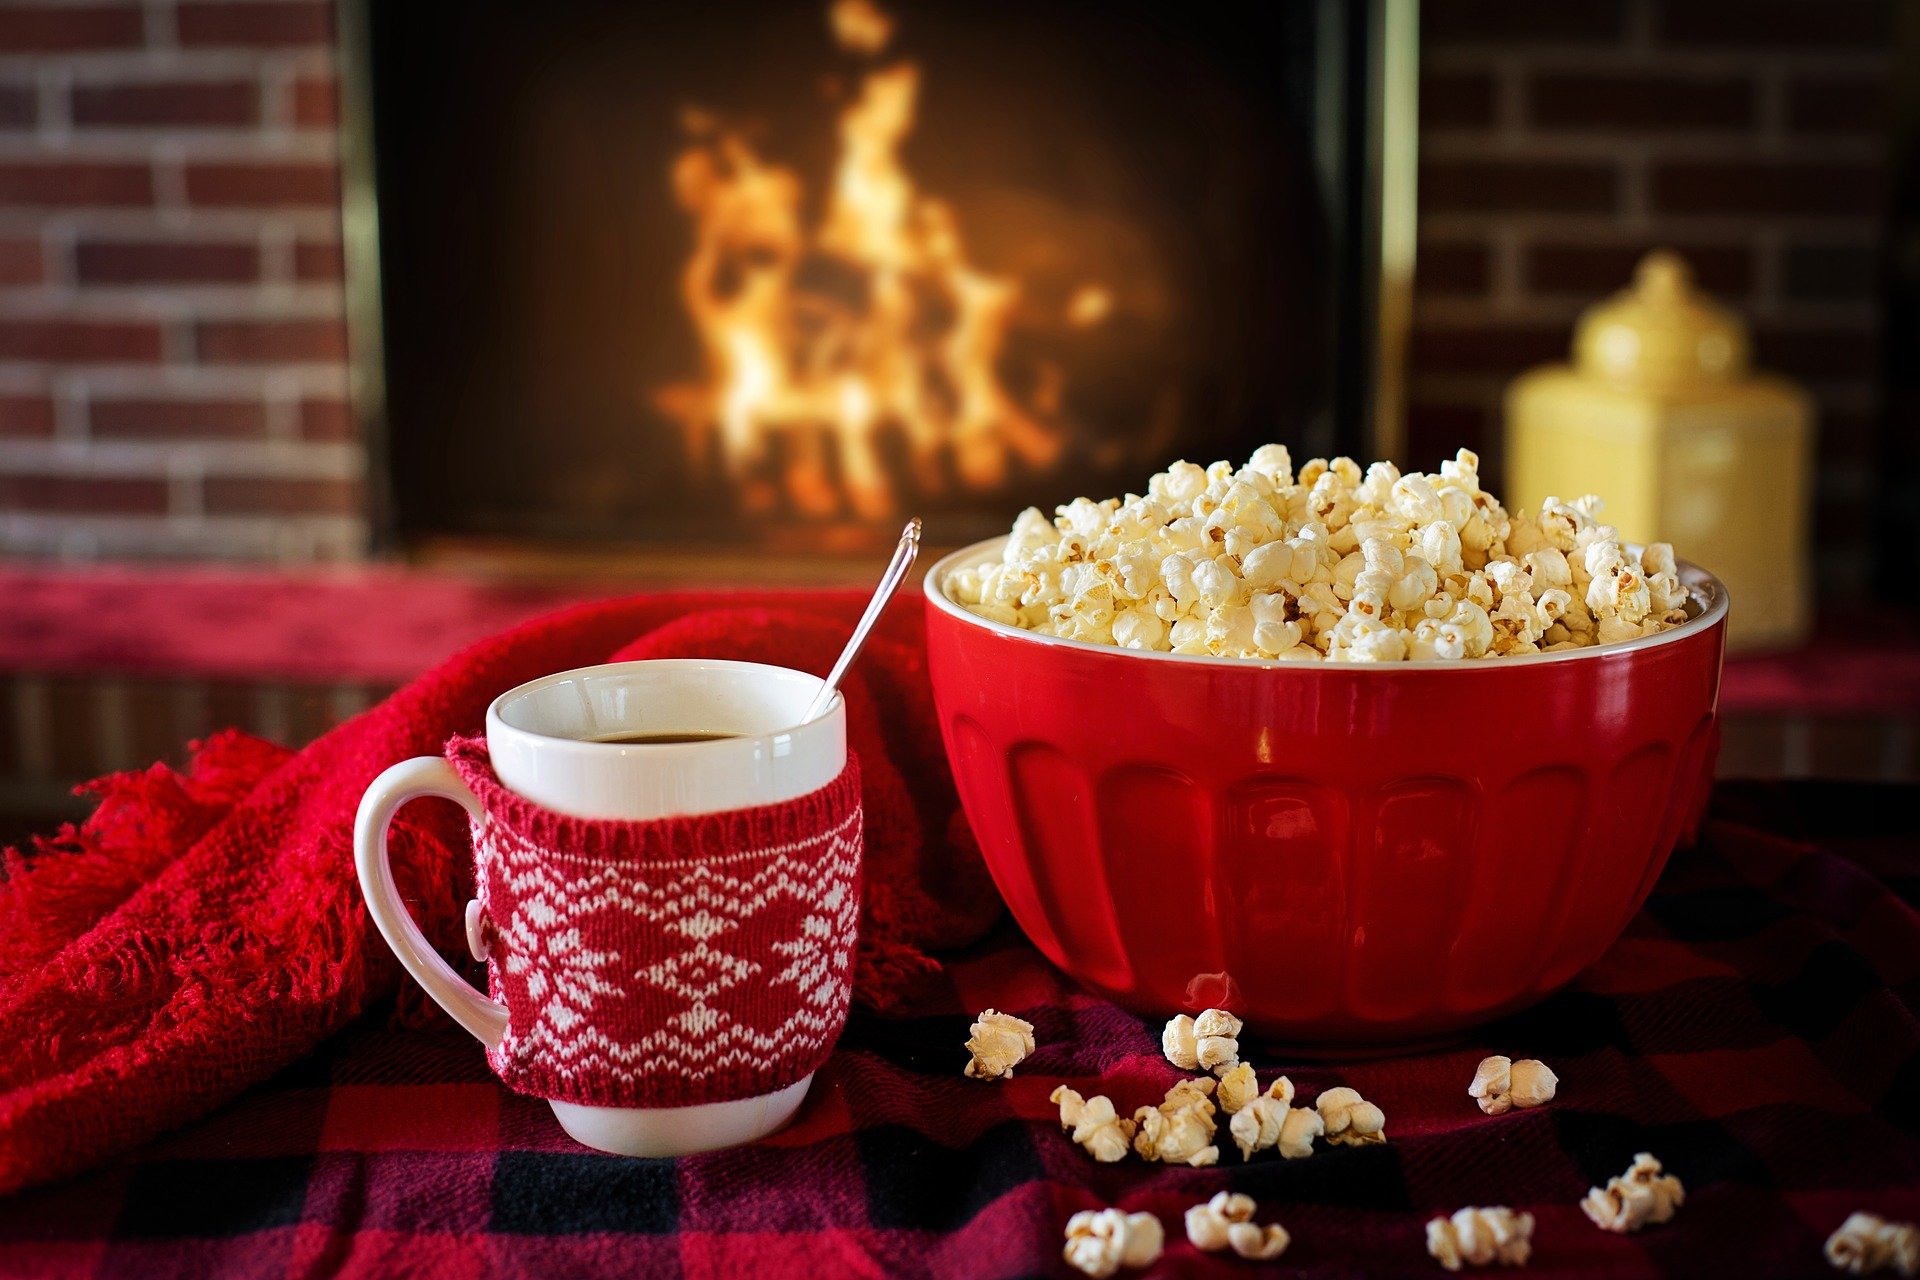 Hot Chocolate and Popcorn by a Cosy Fire